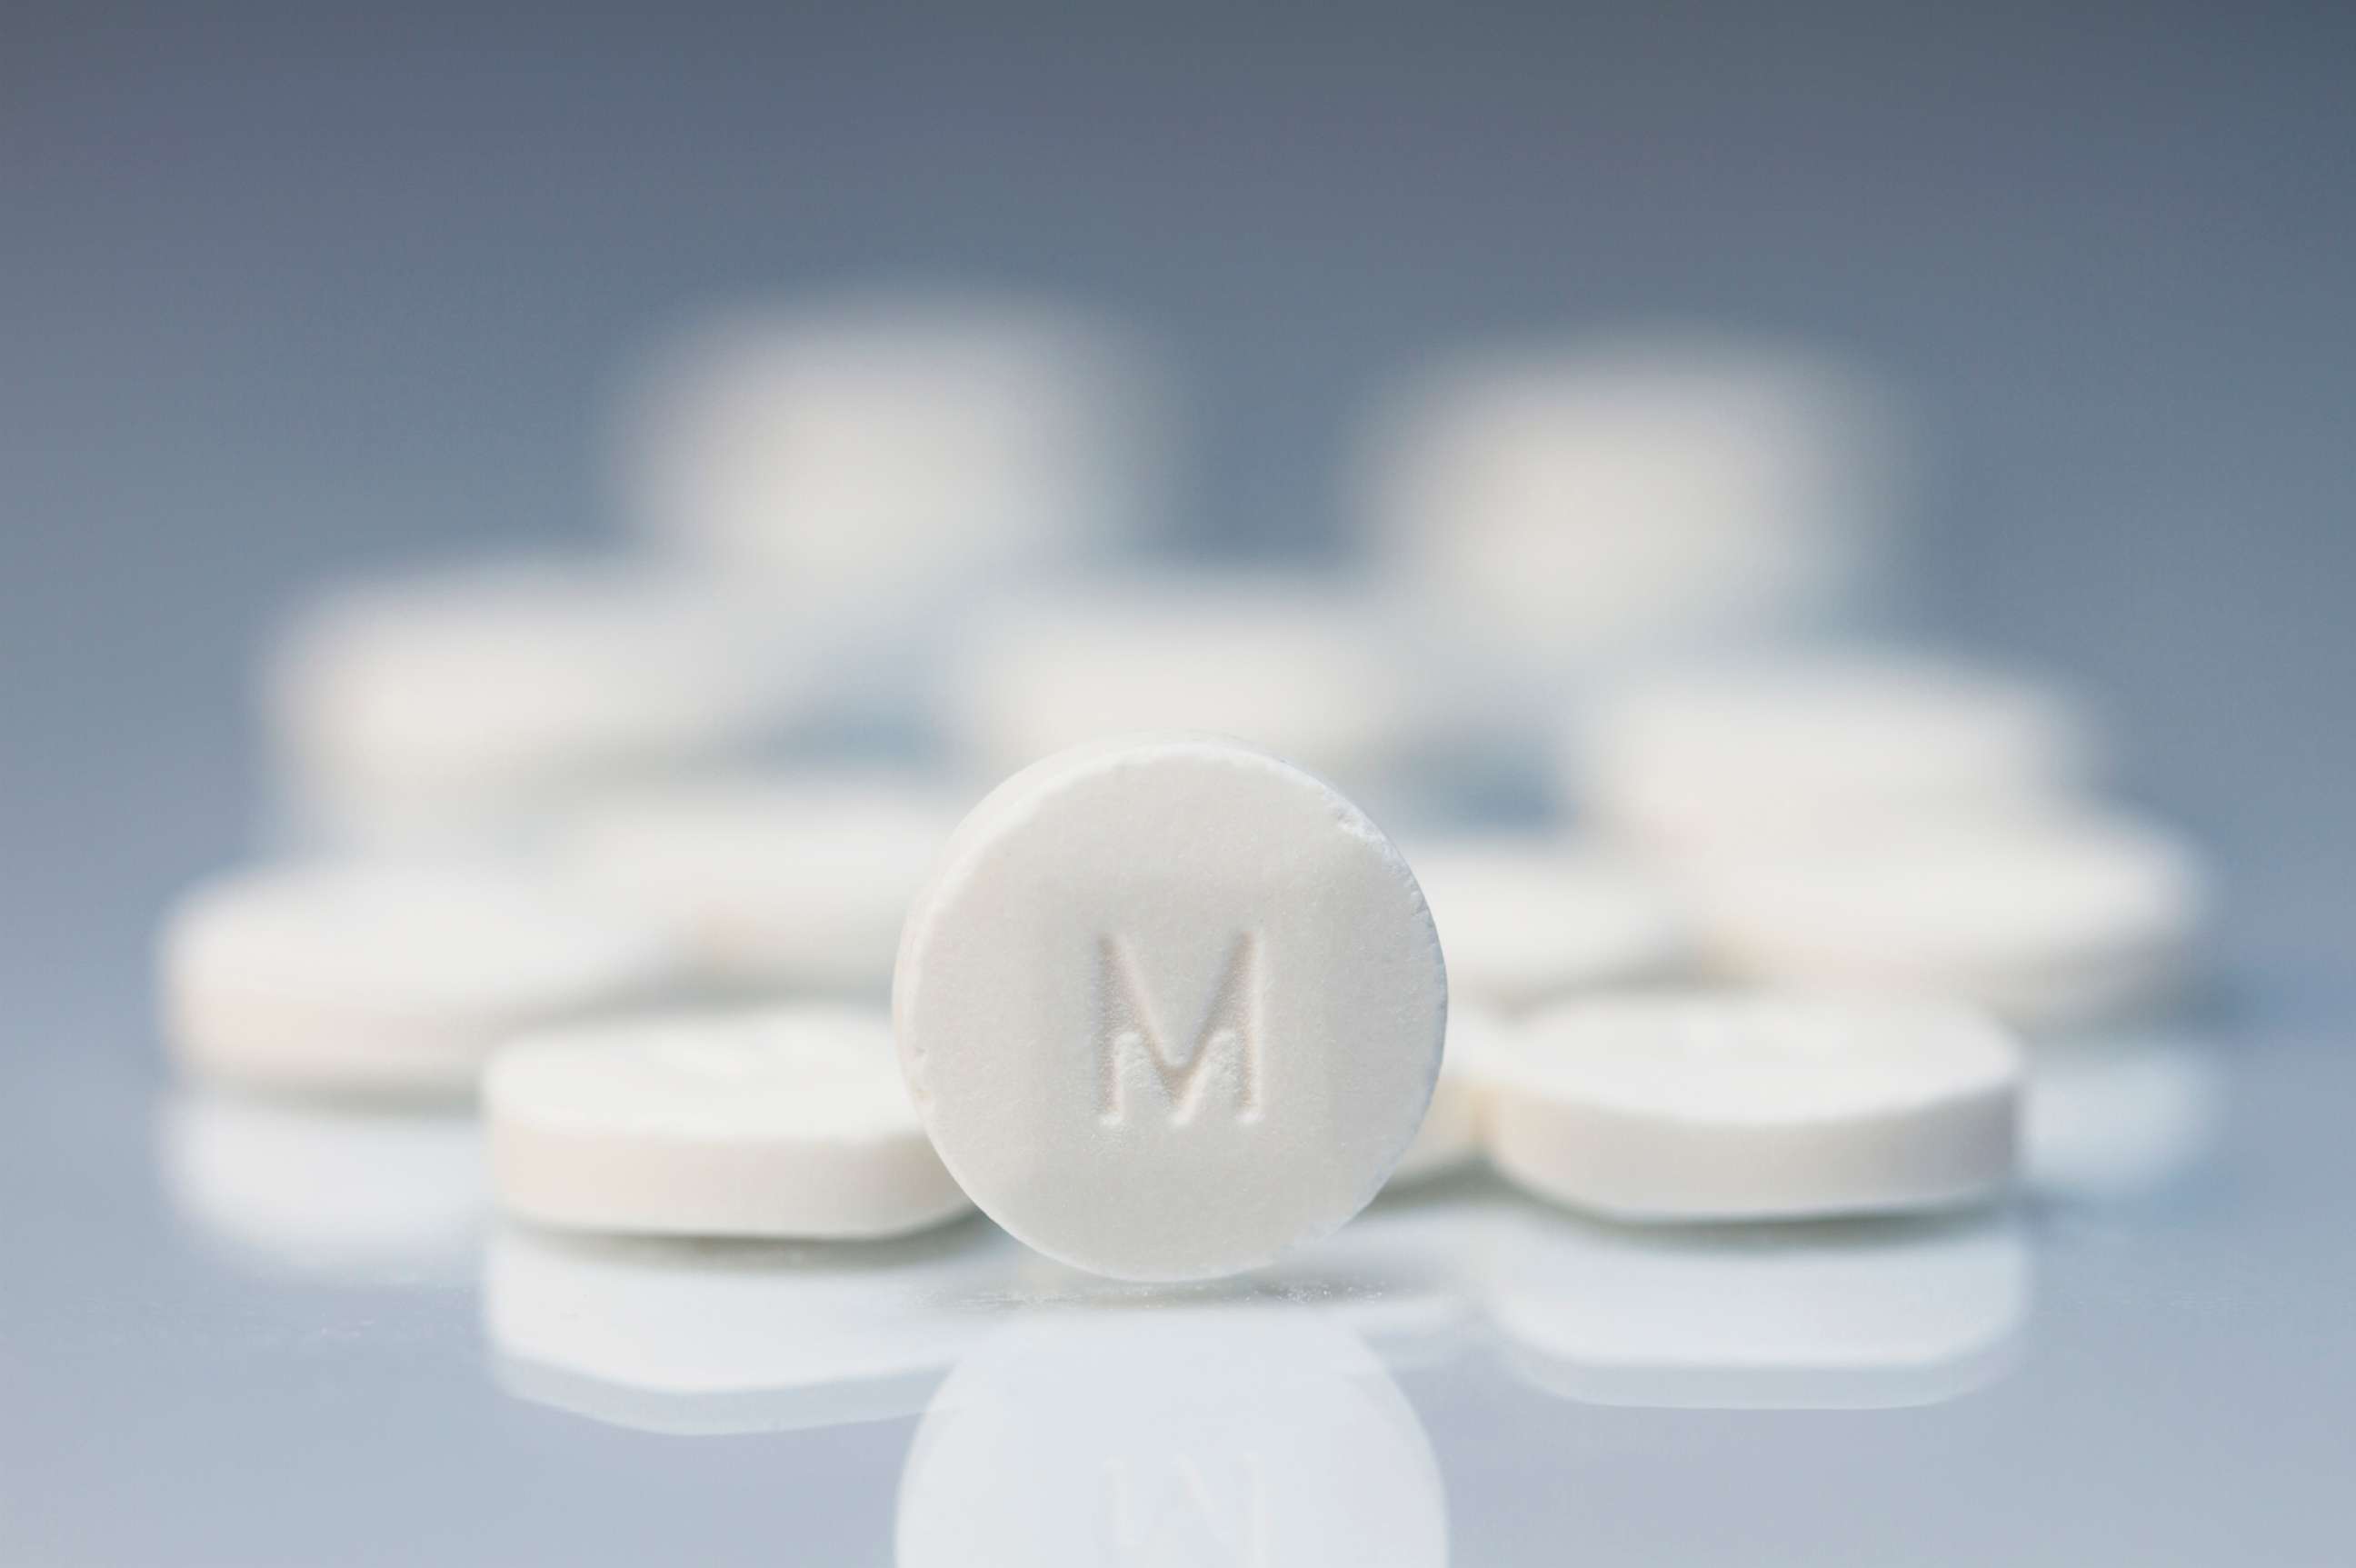 PHOTO: Methylphenidate 10-mg pills. Methylphenidate also known as Ritalin is a central nervous system stimulant used in the treatment of attention deficit hyperactivity disorder (ADHD).